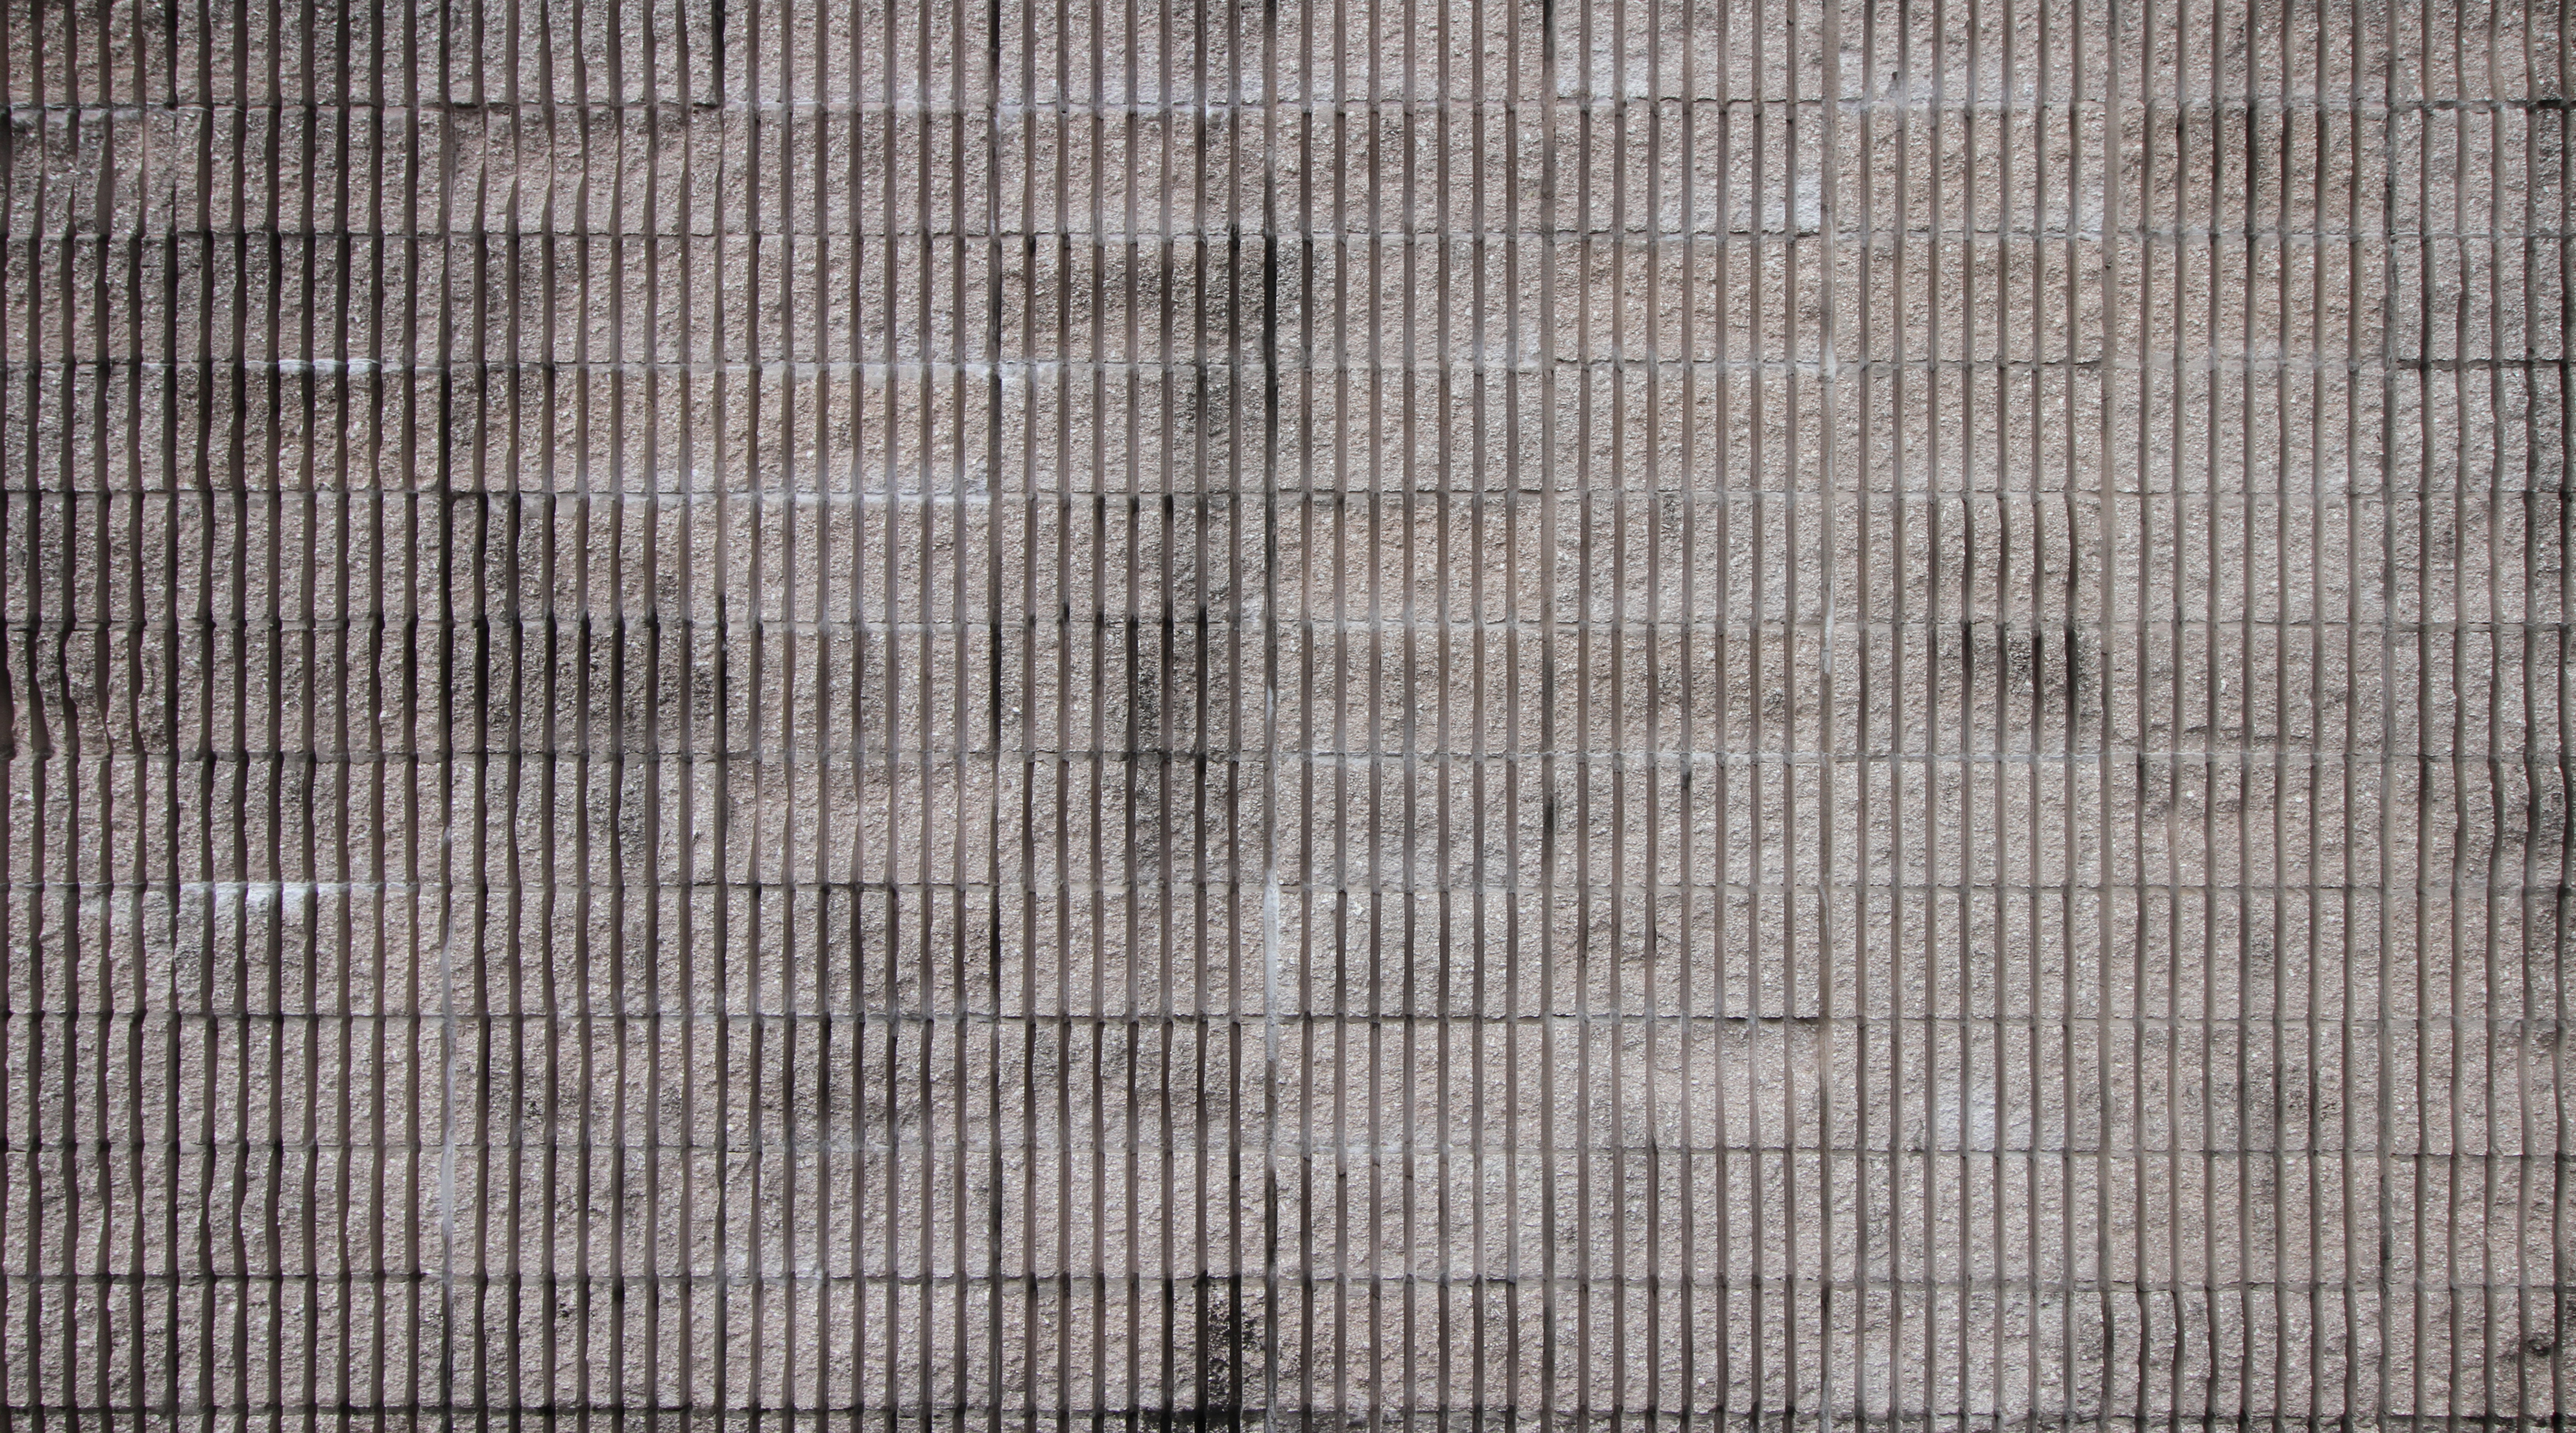 Grooved Concrete Wall Texture - 14Textures